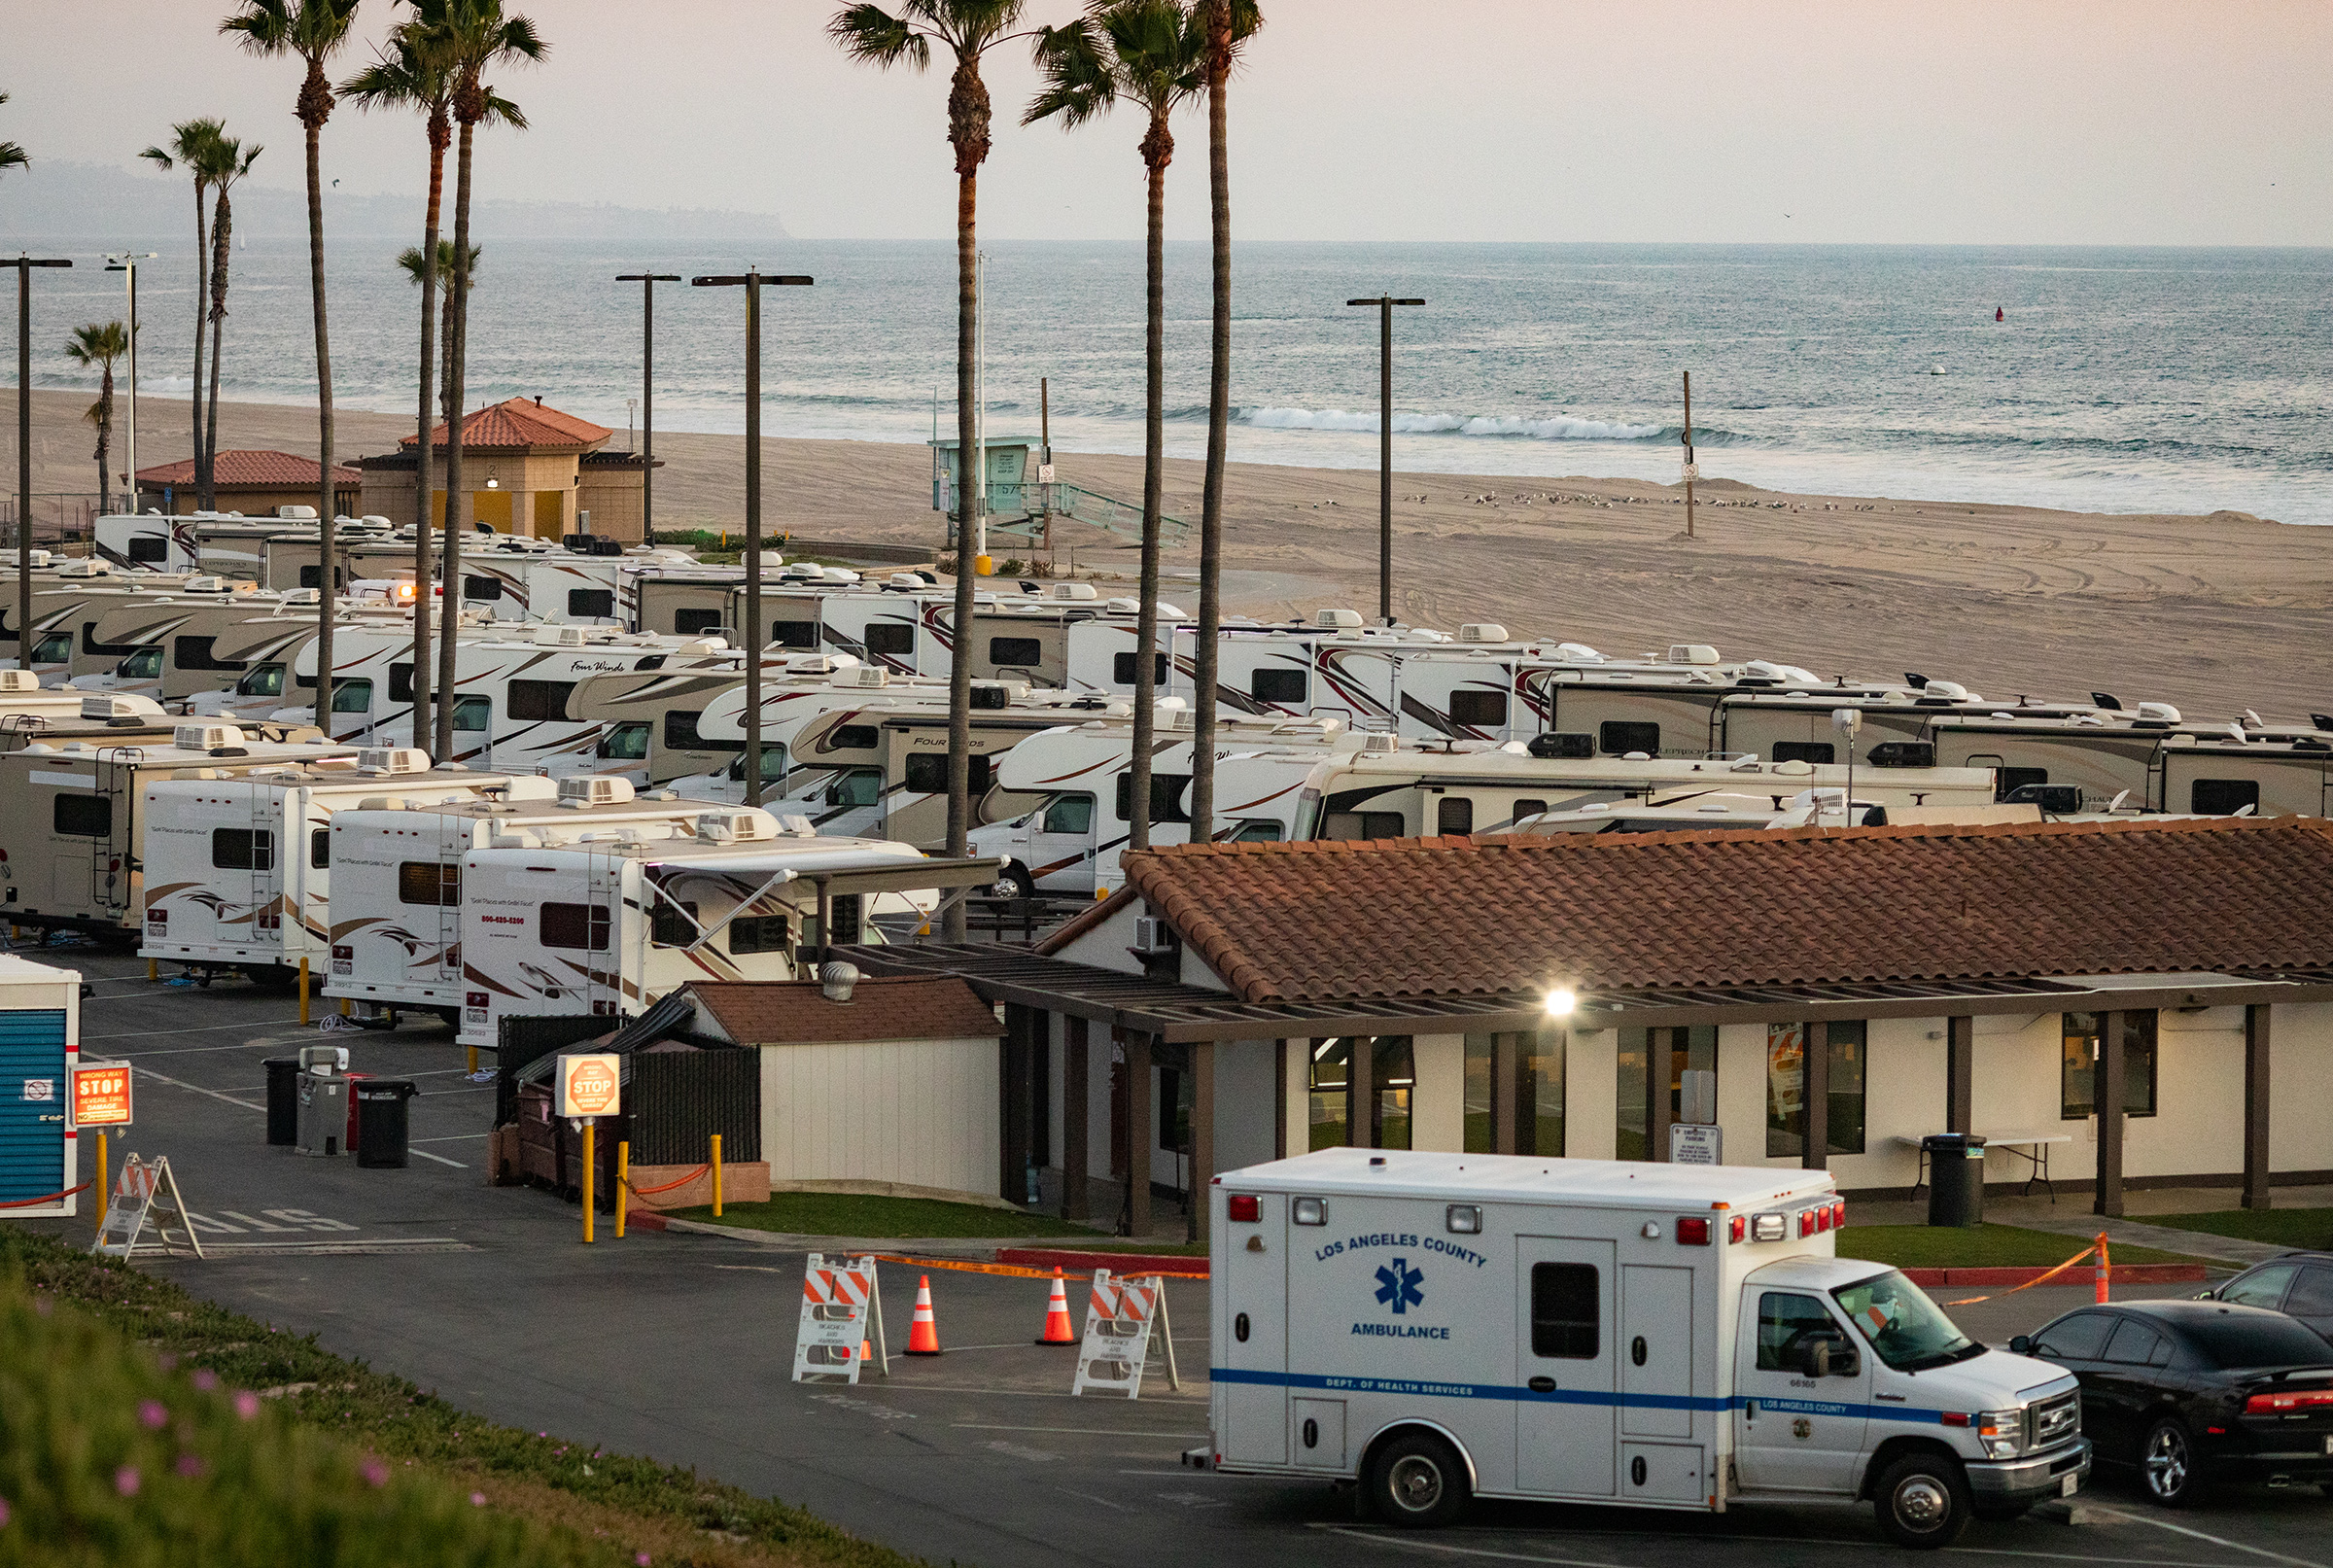 An ambulance arrives in a beachside parking lot being used with R.V's as an isolation zone for people with COVID-19, on April 1st at Dockweiler State Beach in Los Angeles, California (John Fredricks—NurPhoto/Getty Images)